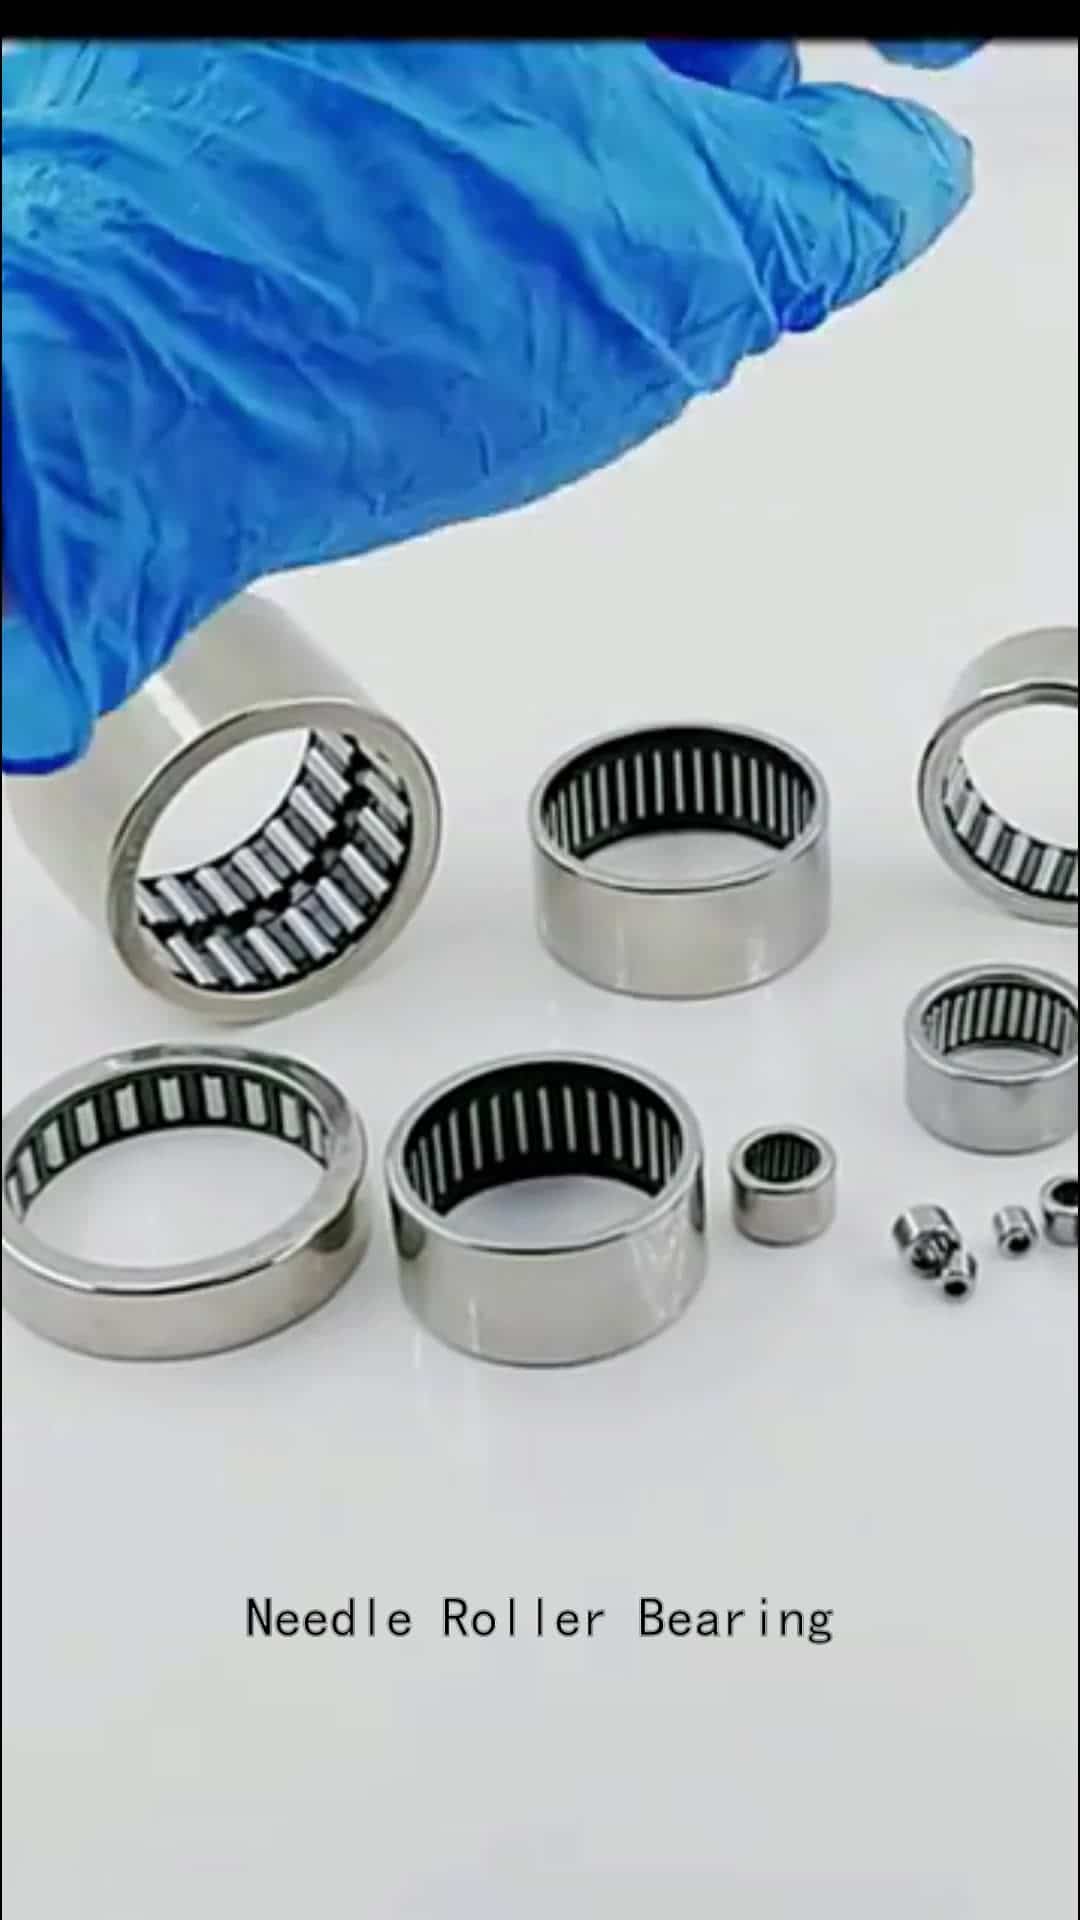 High quality Flat Needle roller thrust bearings AXK 0821 TN made in Germany